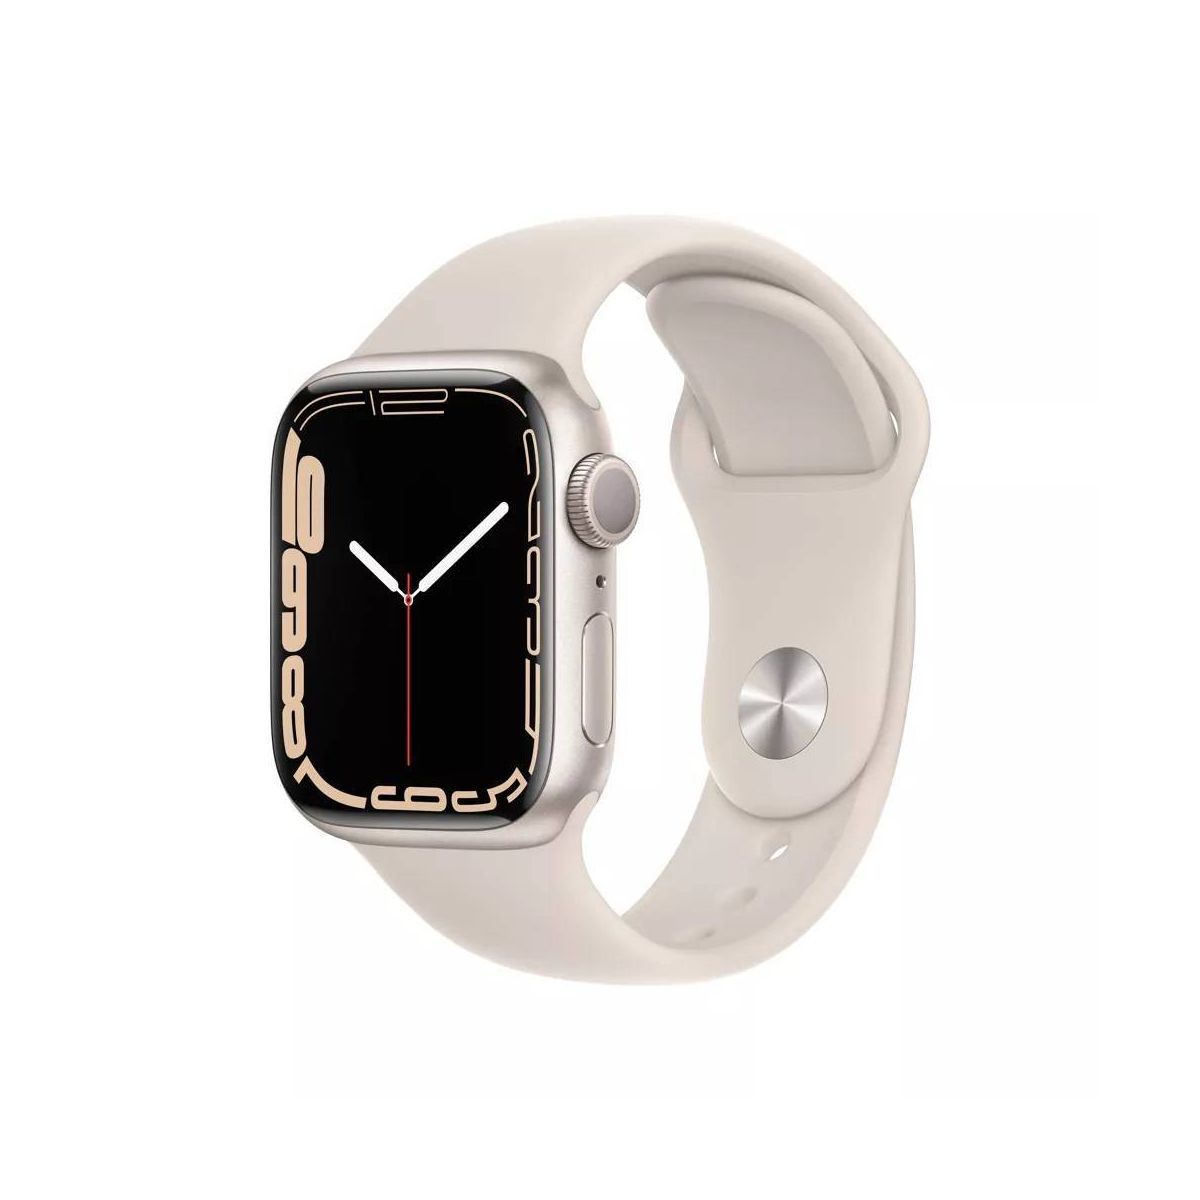 Apple Watch Series 7 GPS Aluminum Case with Sport Band - Target Certified Refurbished | Target